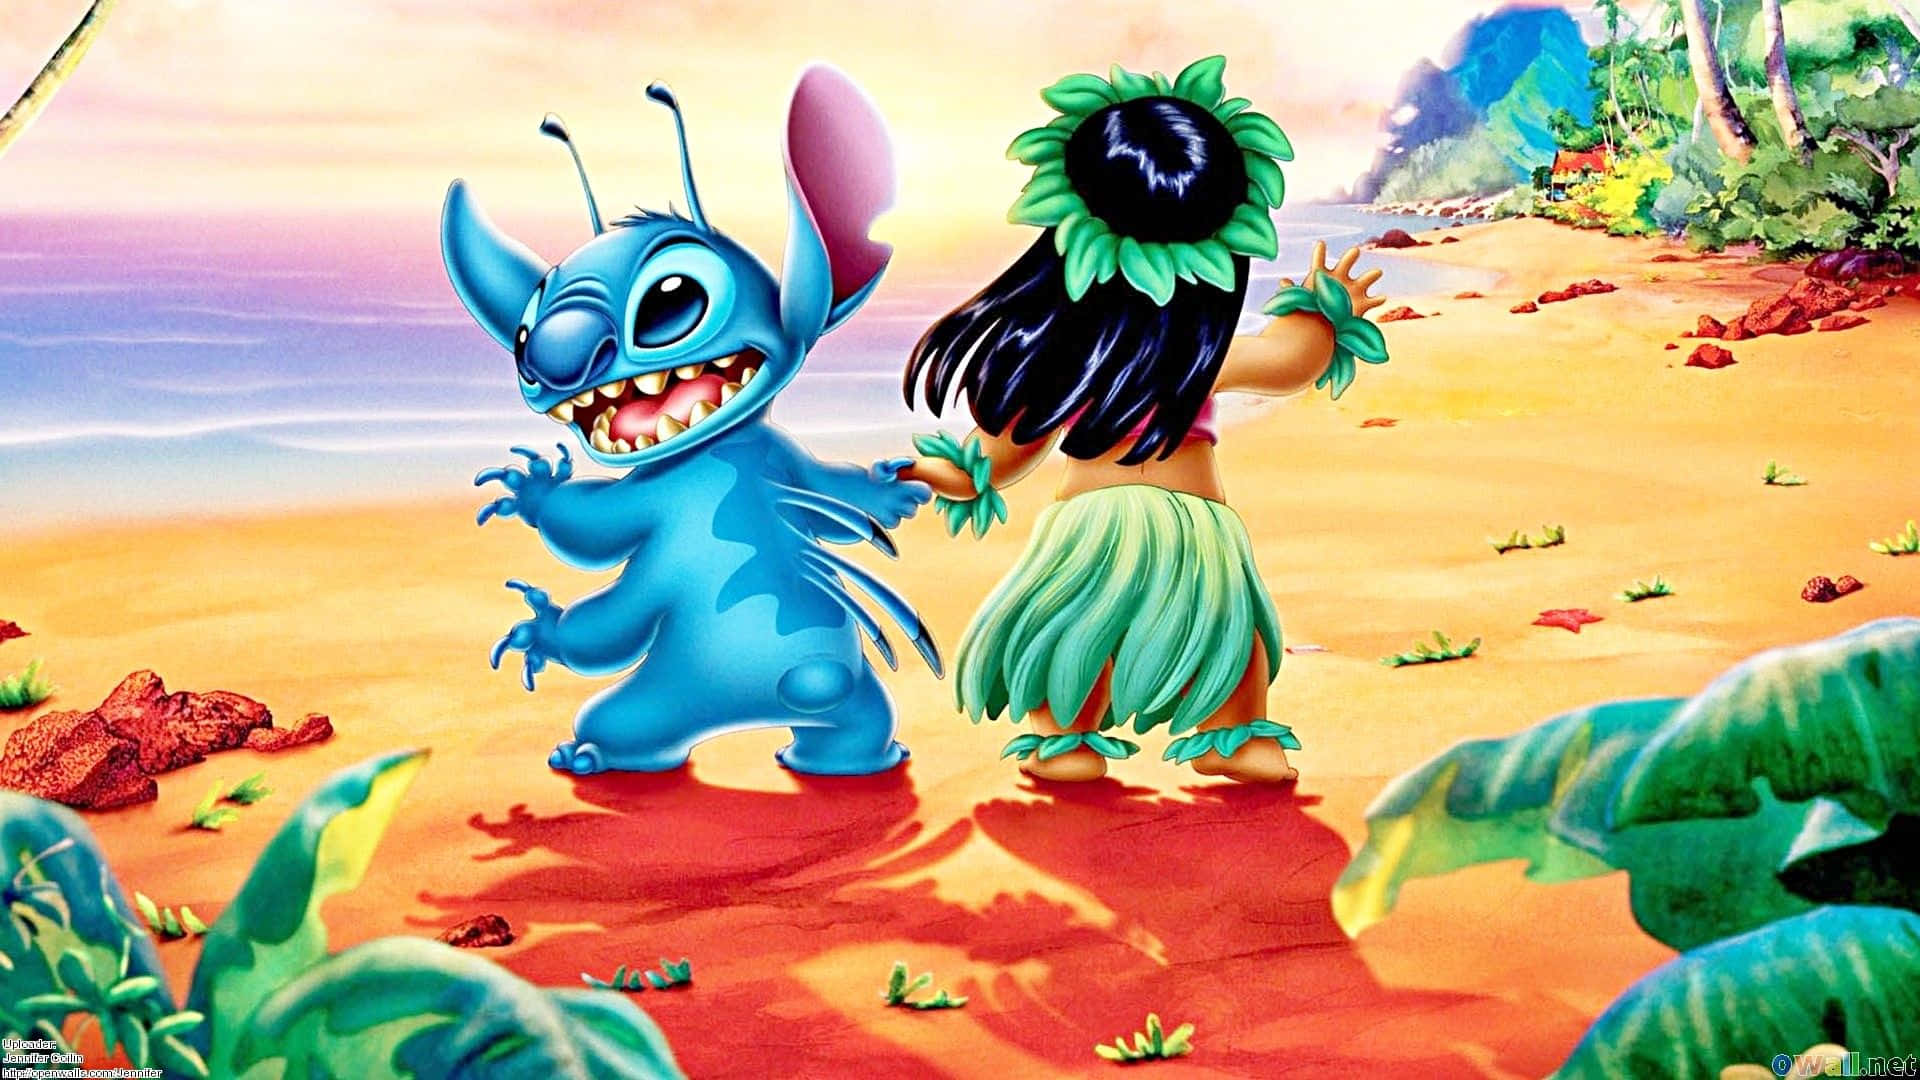 Get Ready for Your Next Adventure with Stitch